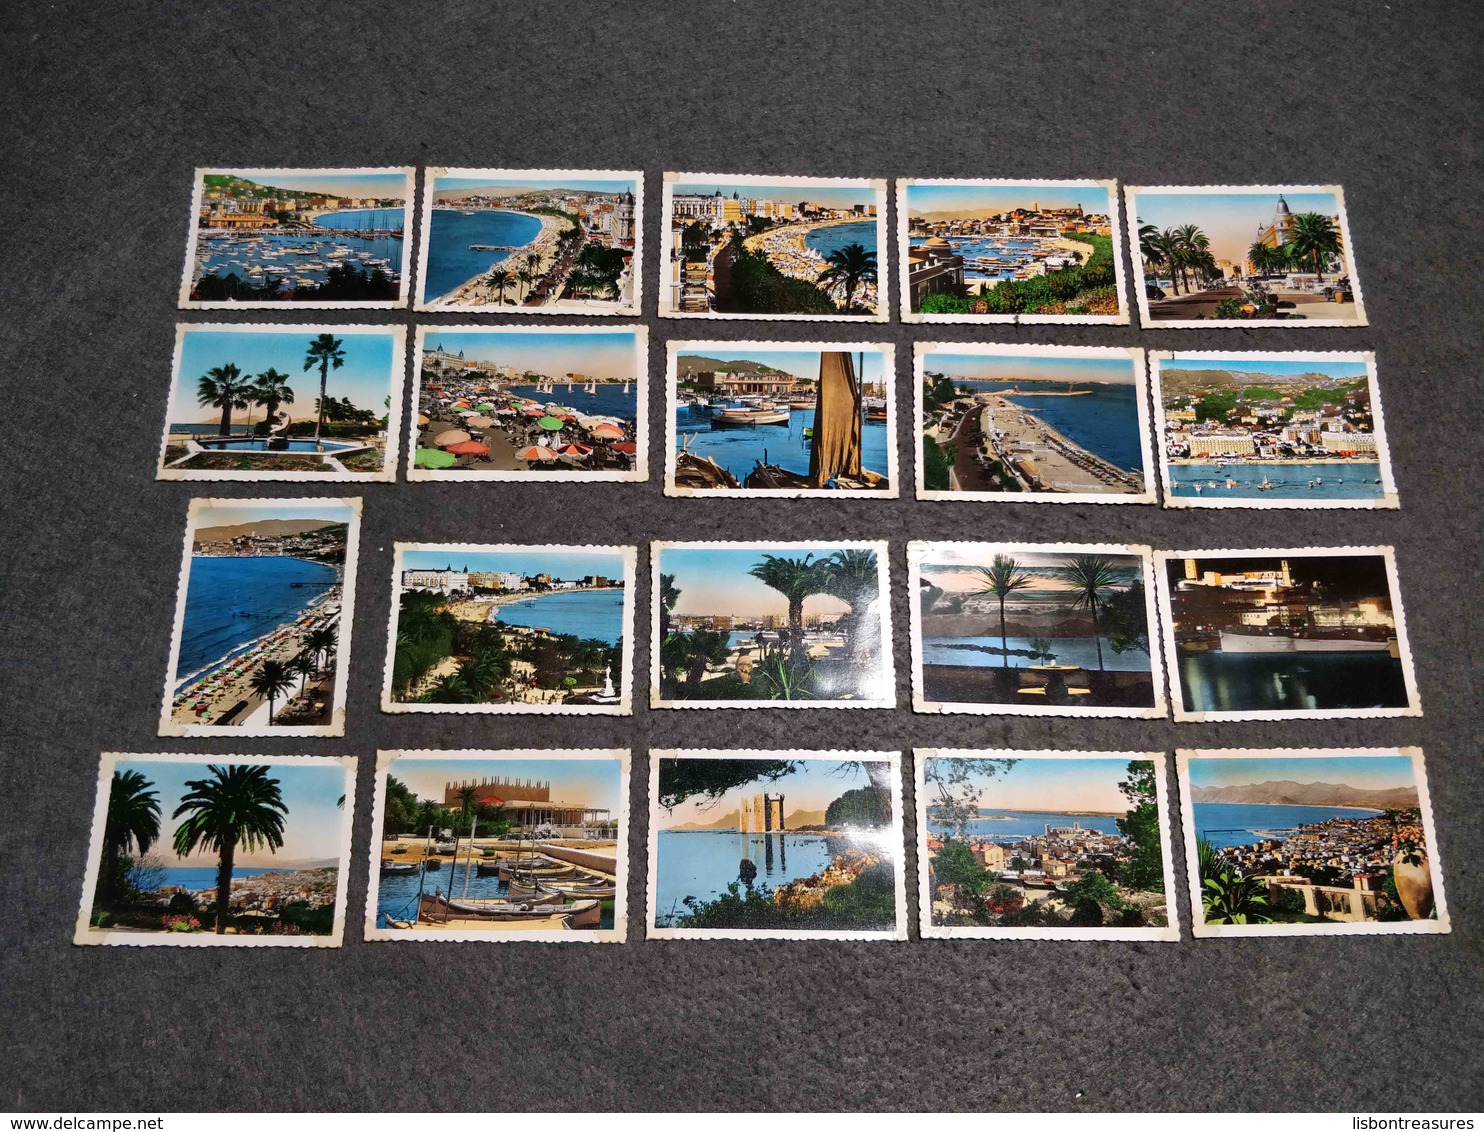 ANTIQUE LOT X 20 SMALL COLOR PHOTOS FRANCE - CANNES VIEWS - 35mm -16mm - 9,5+8+S8mm Film Rolls